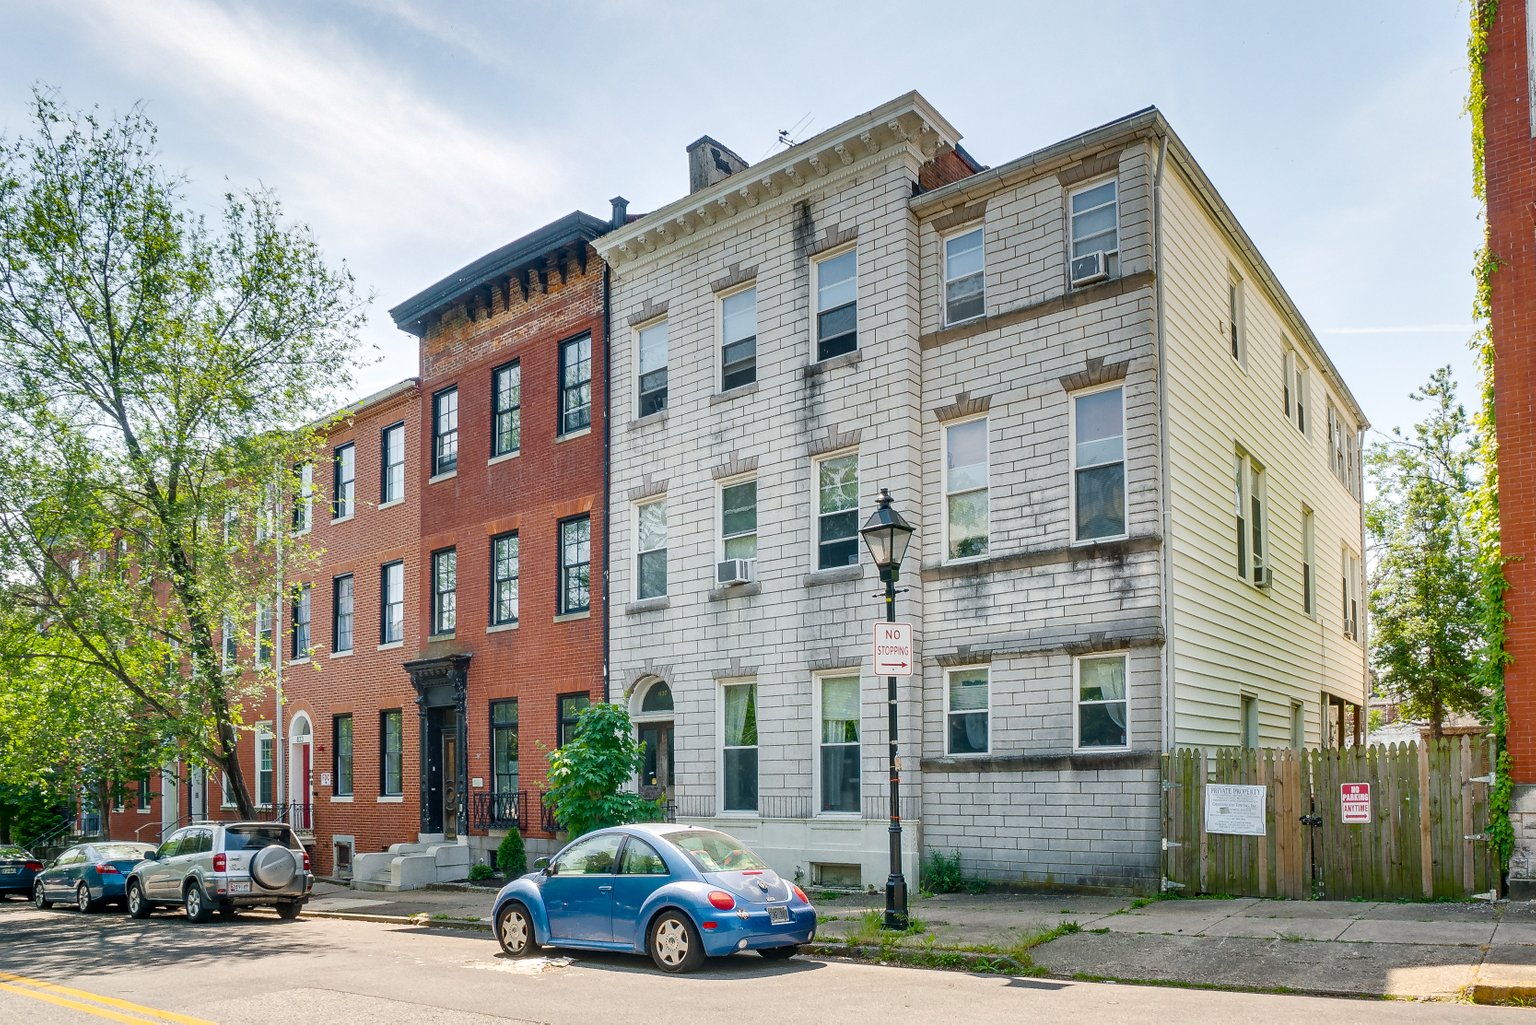 837 Hollins Street: 8 Apartments in Hollins Market/ 1 Block from University of Maryland Grad Schools/ Value Add Opportunity